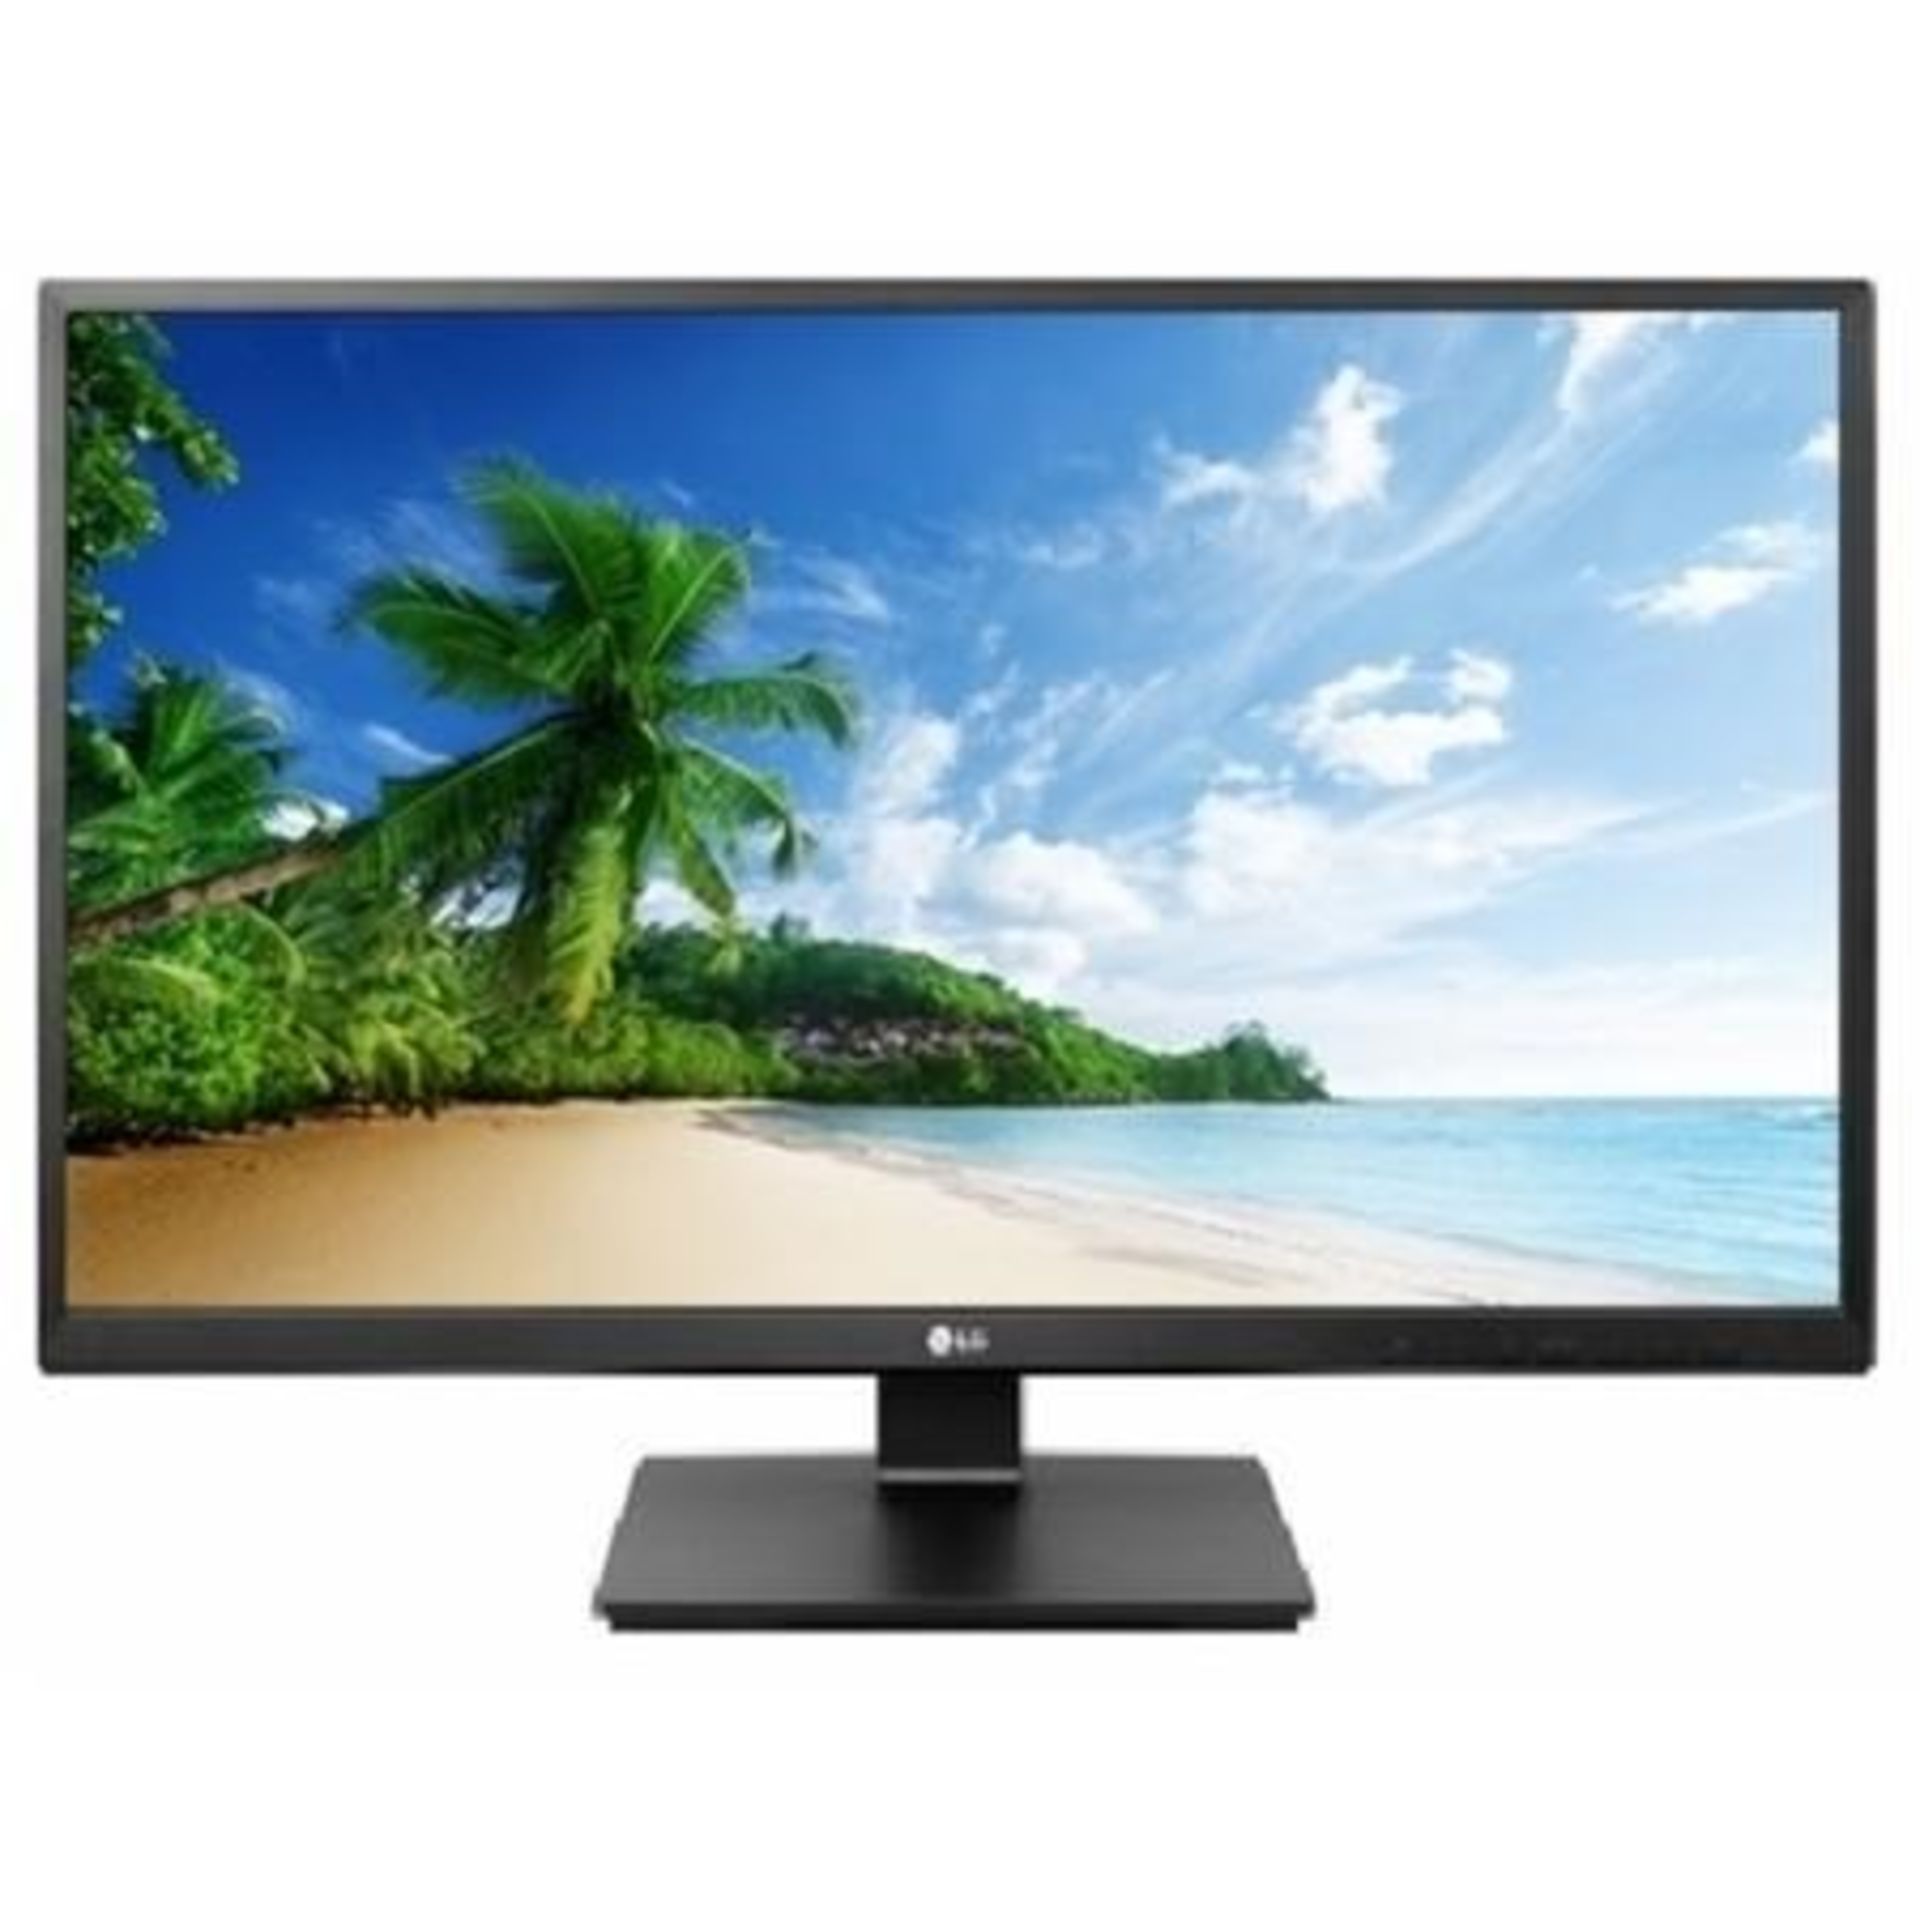 + VAT Grade A LG 24 Inch FULL HD IPS LED MONITOR WITH SPEAKERS - D-SUB, DVI-D, HDMI, DISPLAY PORT